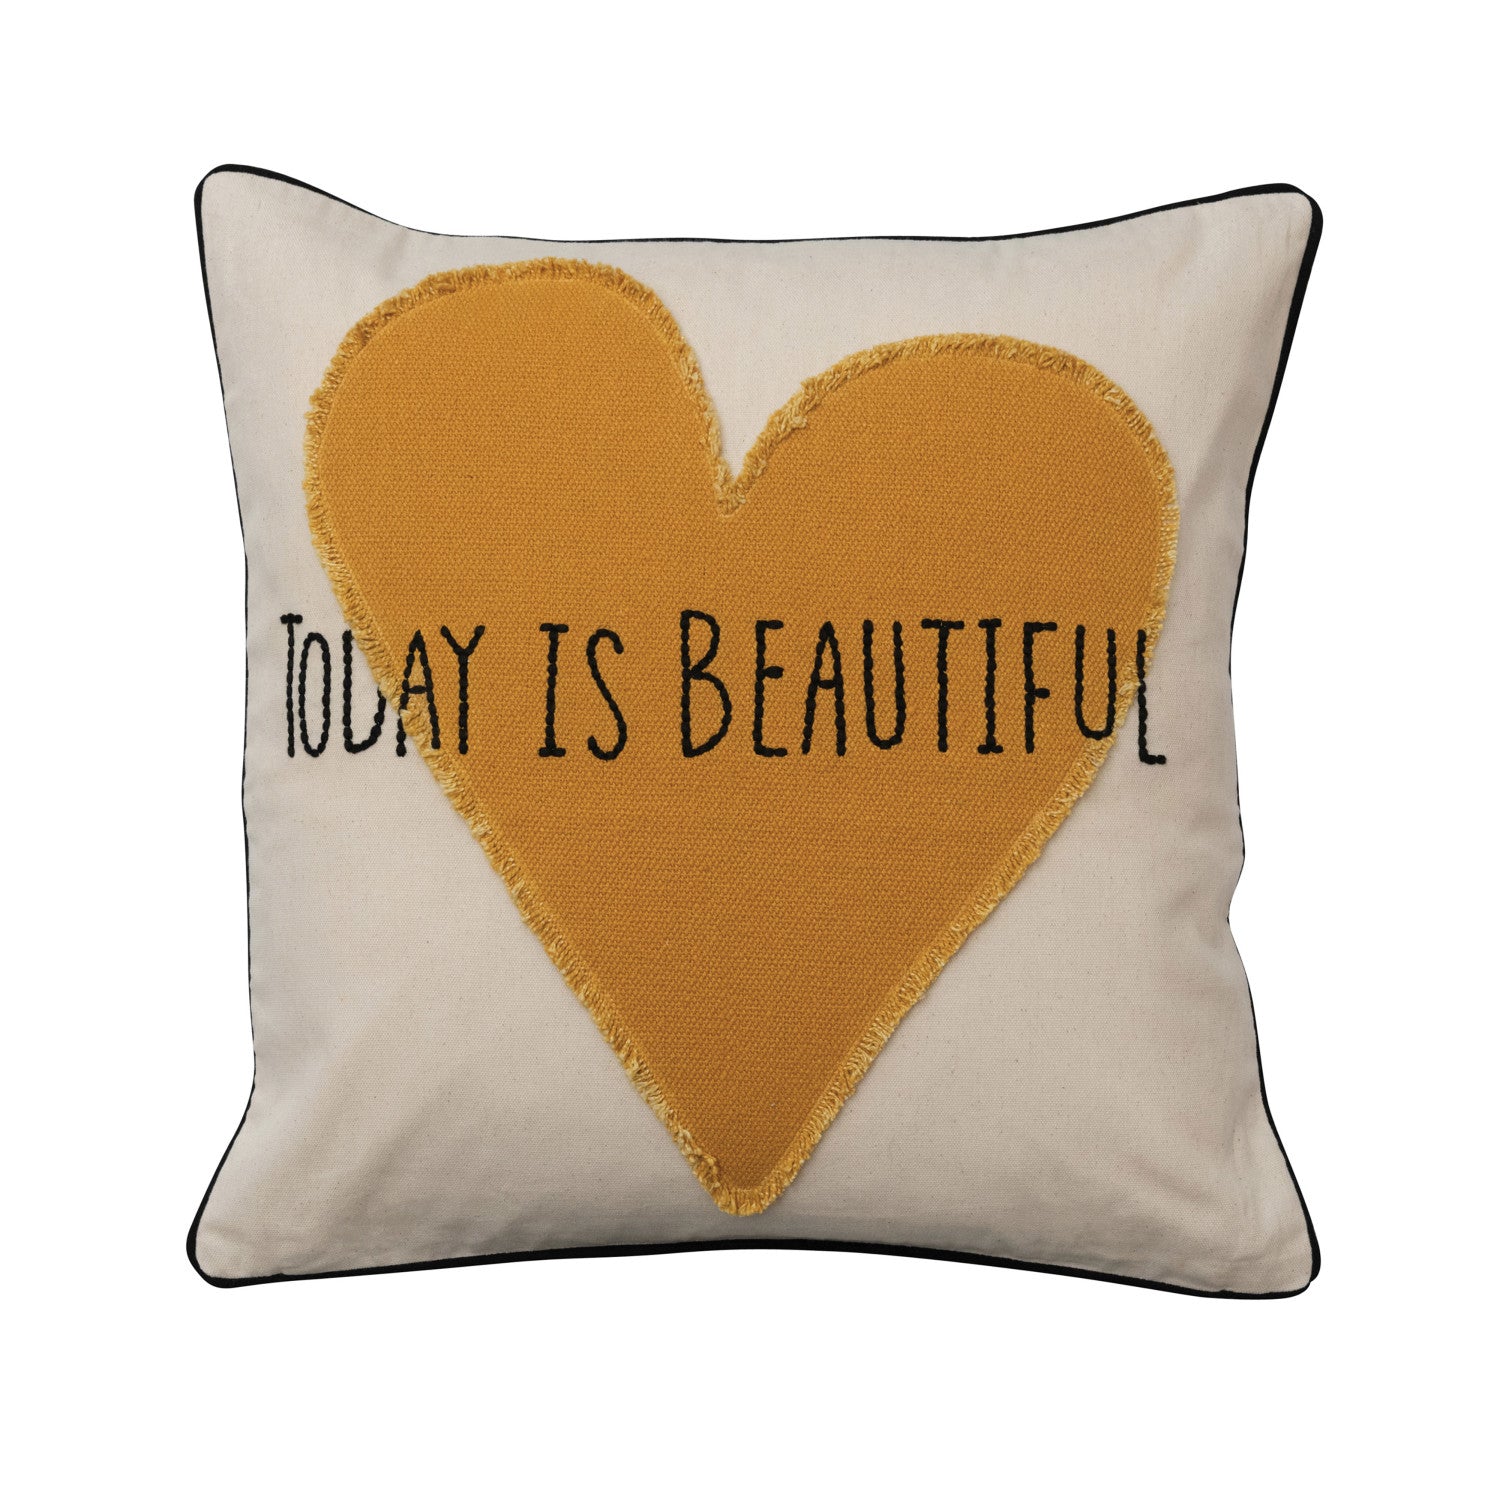 Today is Beautiful Pillow